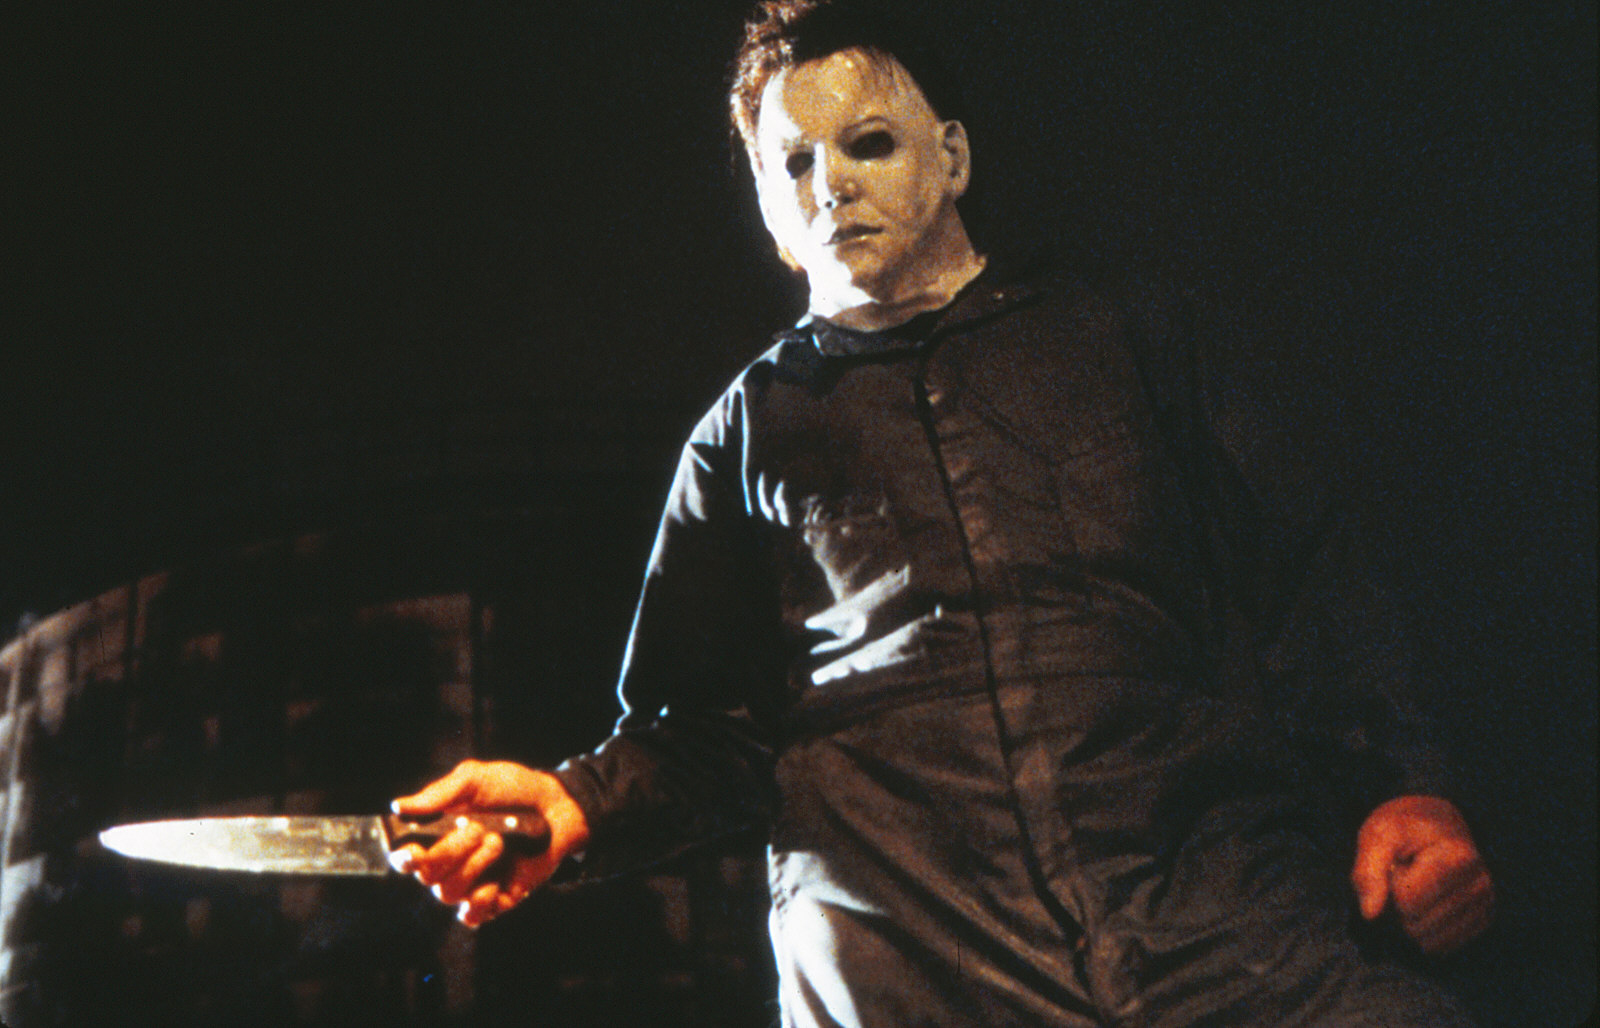 Halloween: The Curse Of Michael Myers Backgrounds, Compatible - PC, Mobile, Gadgets| 1600x1028 px